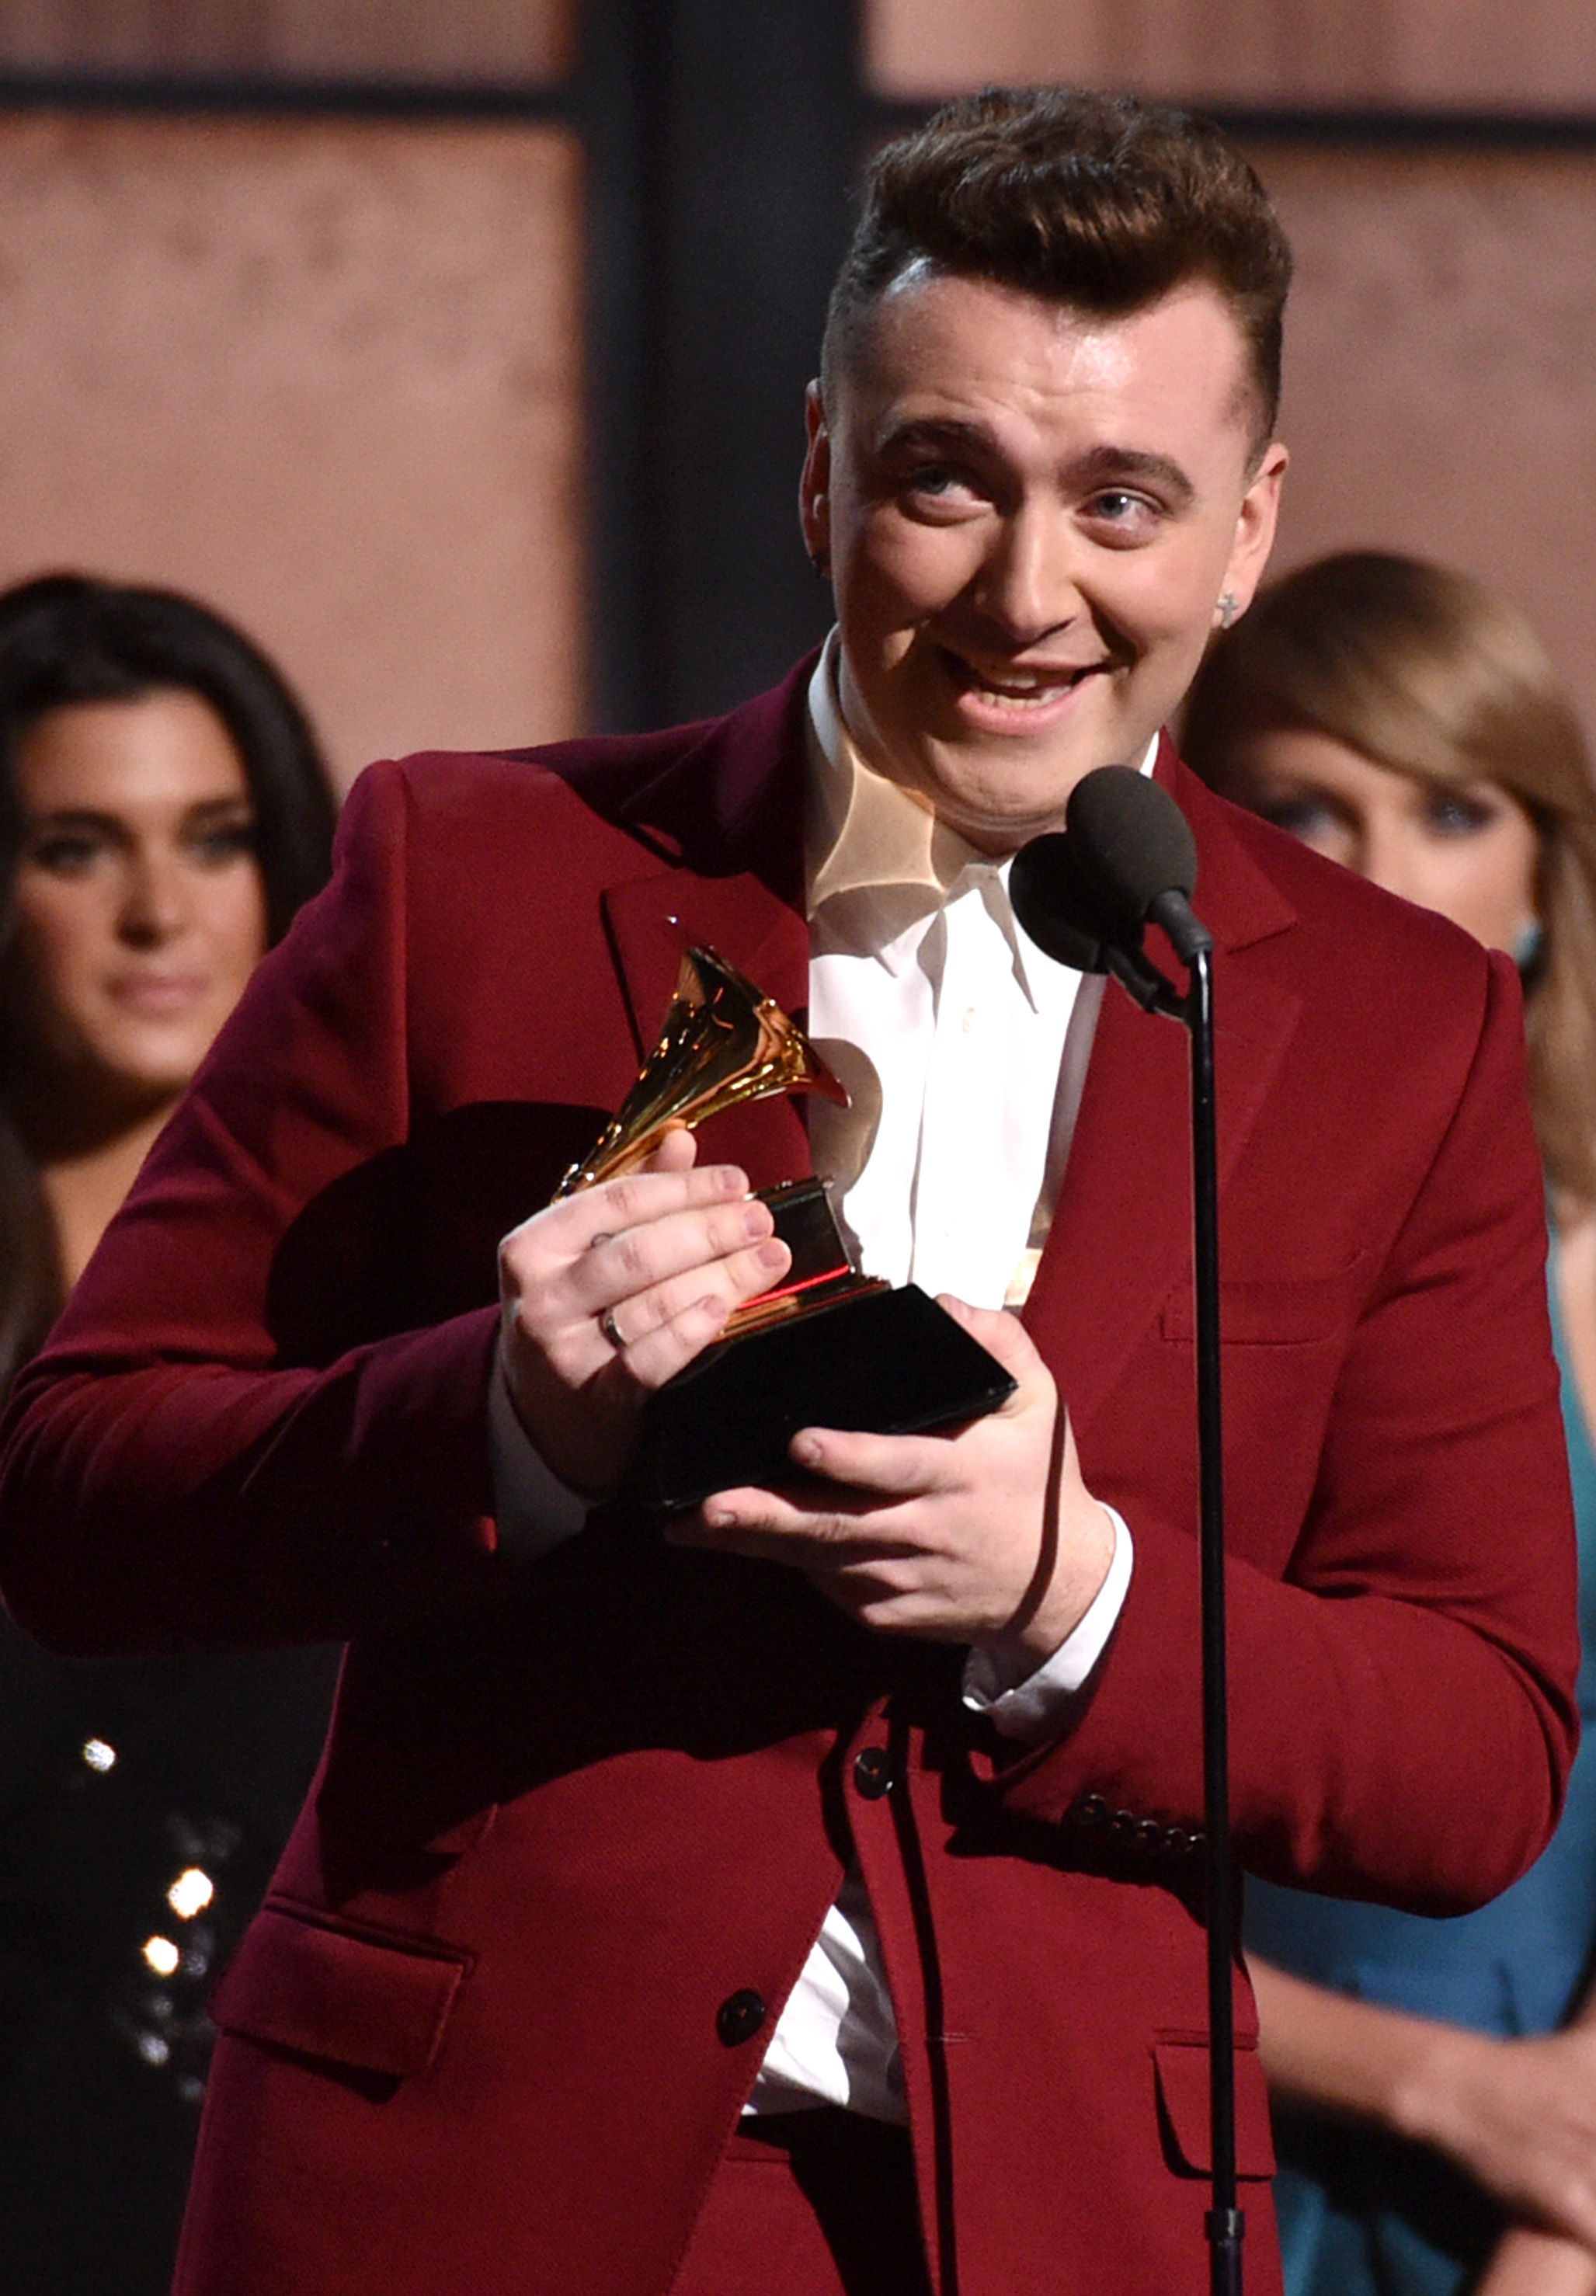 Sam Smith wins 4 Grammys; Beck honored for top album The SpokesmanReview